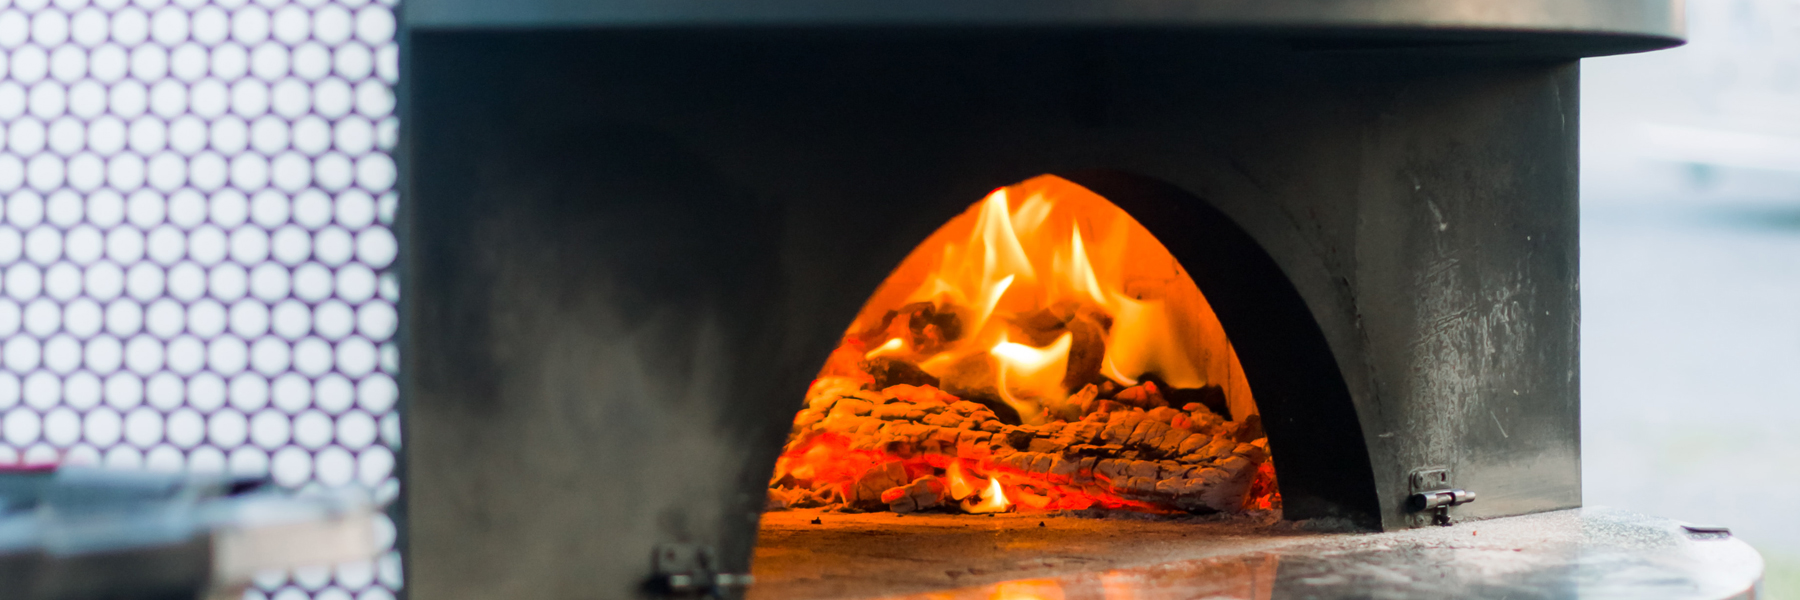 Cipolla Rossa's Wood Fired Oven at work